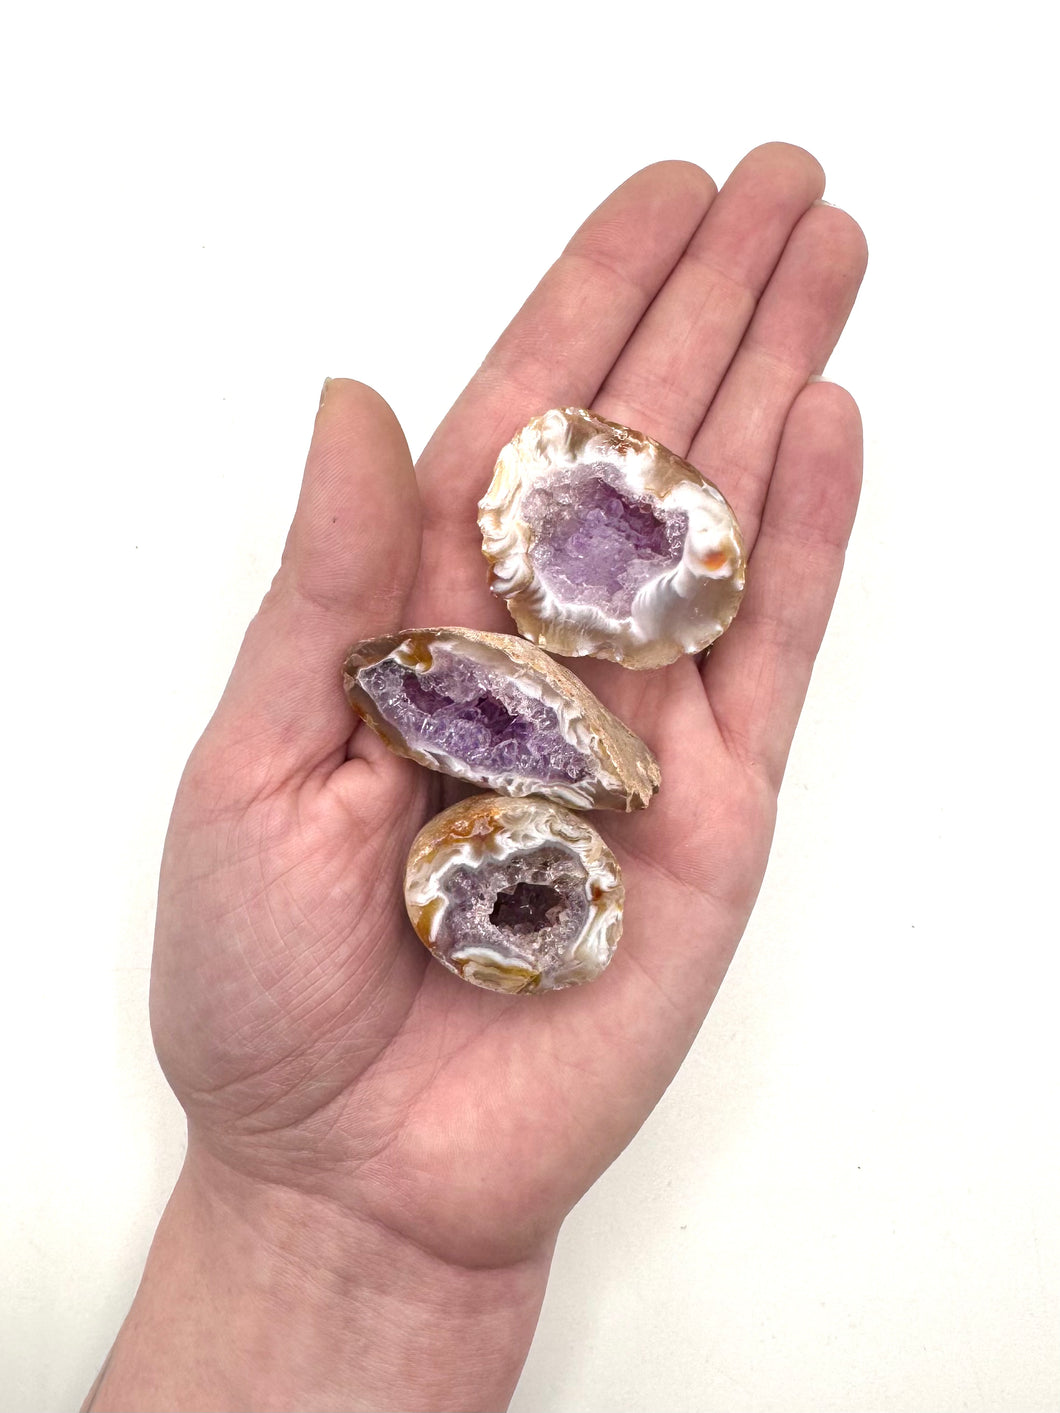 Druzy Agate with Amethyst Cluster Small